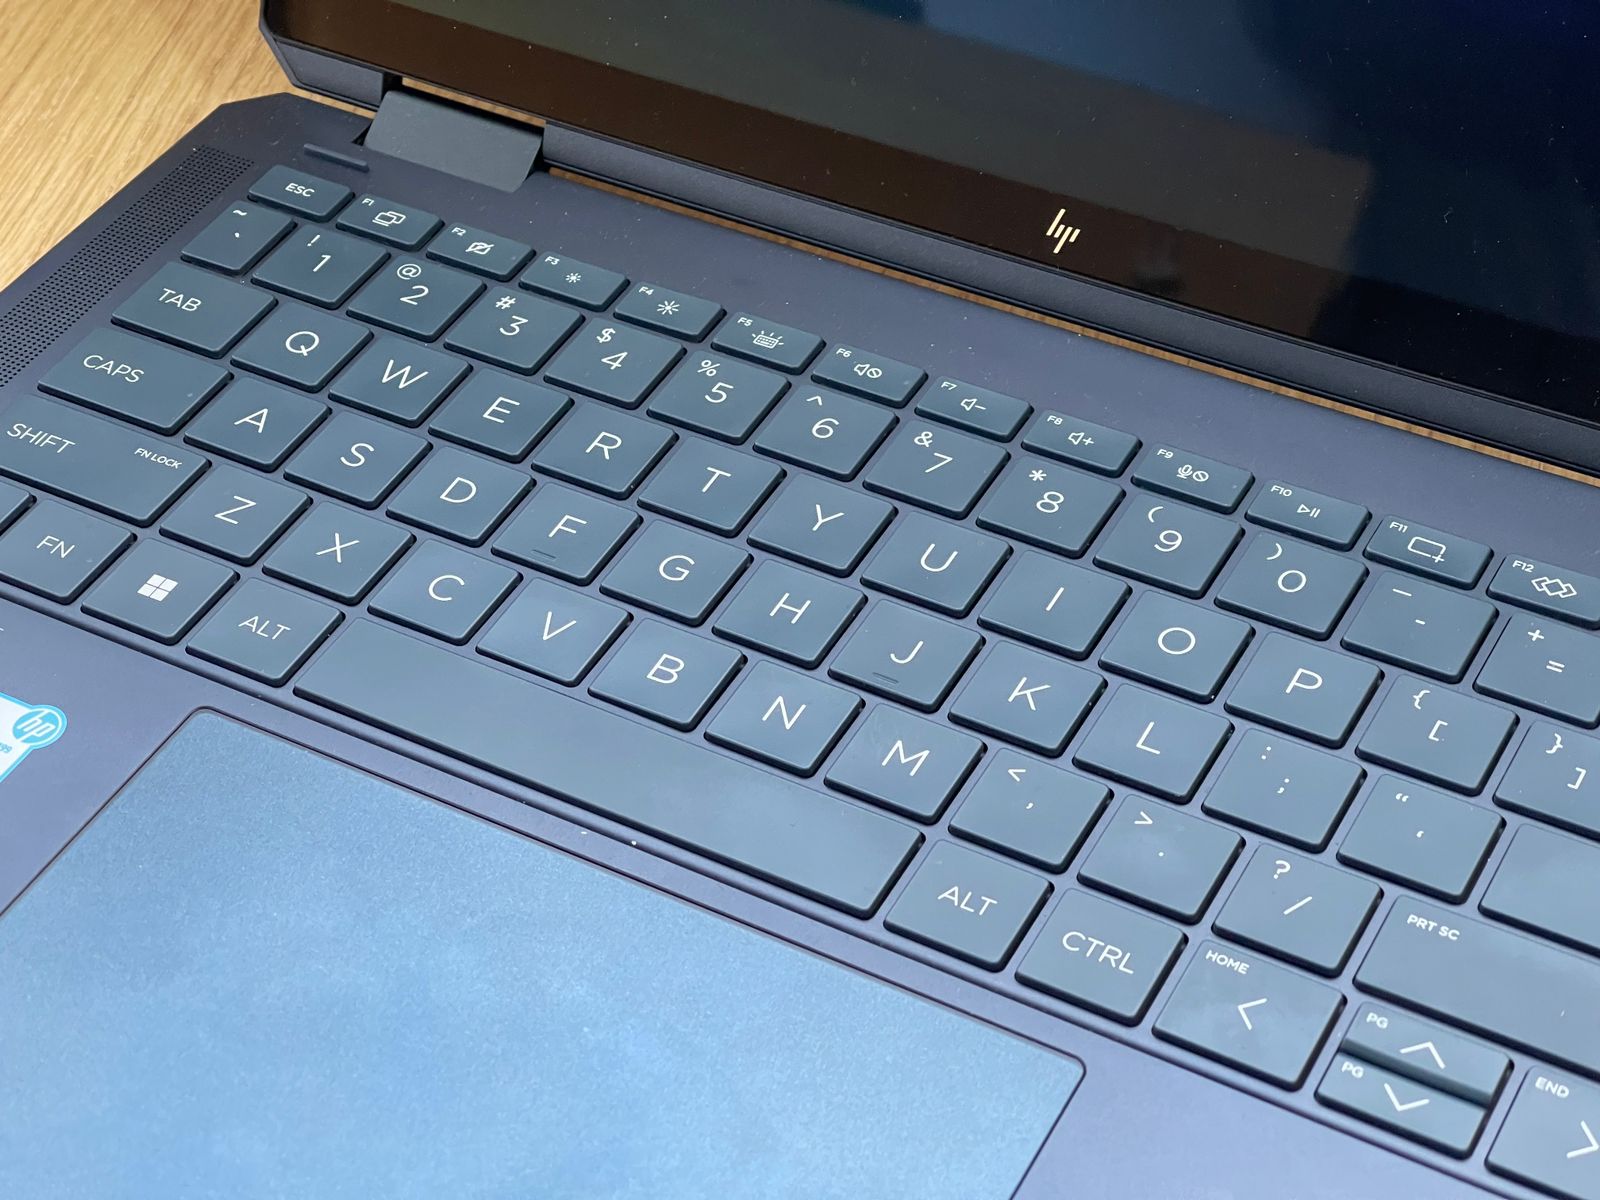 HP Spectre x360 14: Keyboard and Trackpad